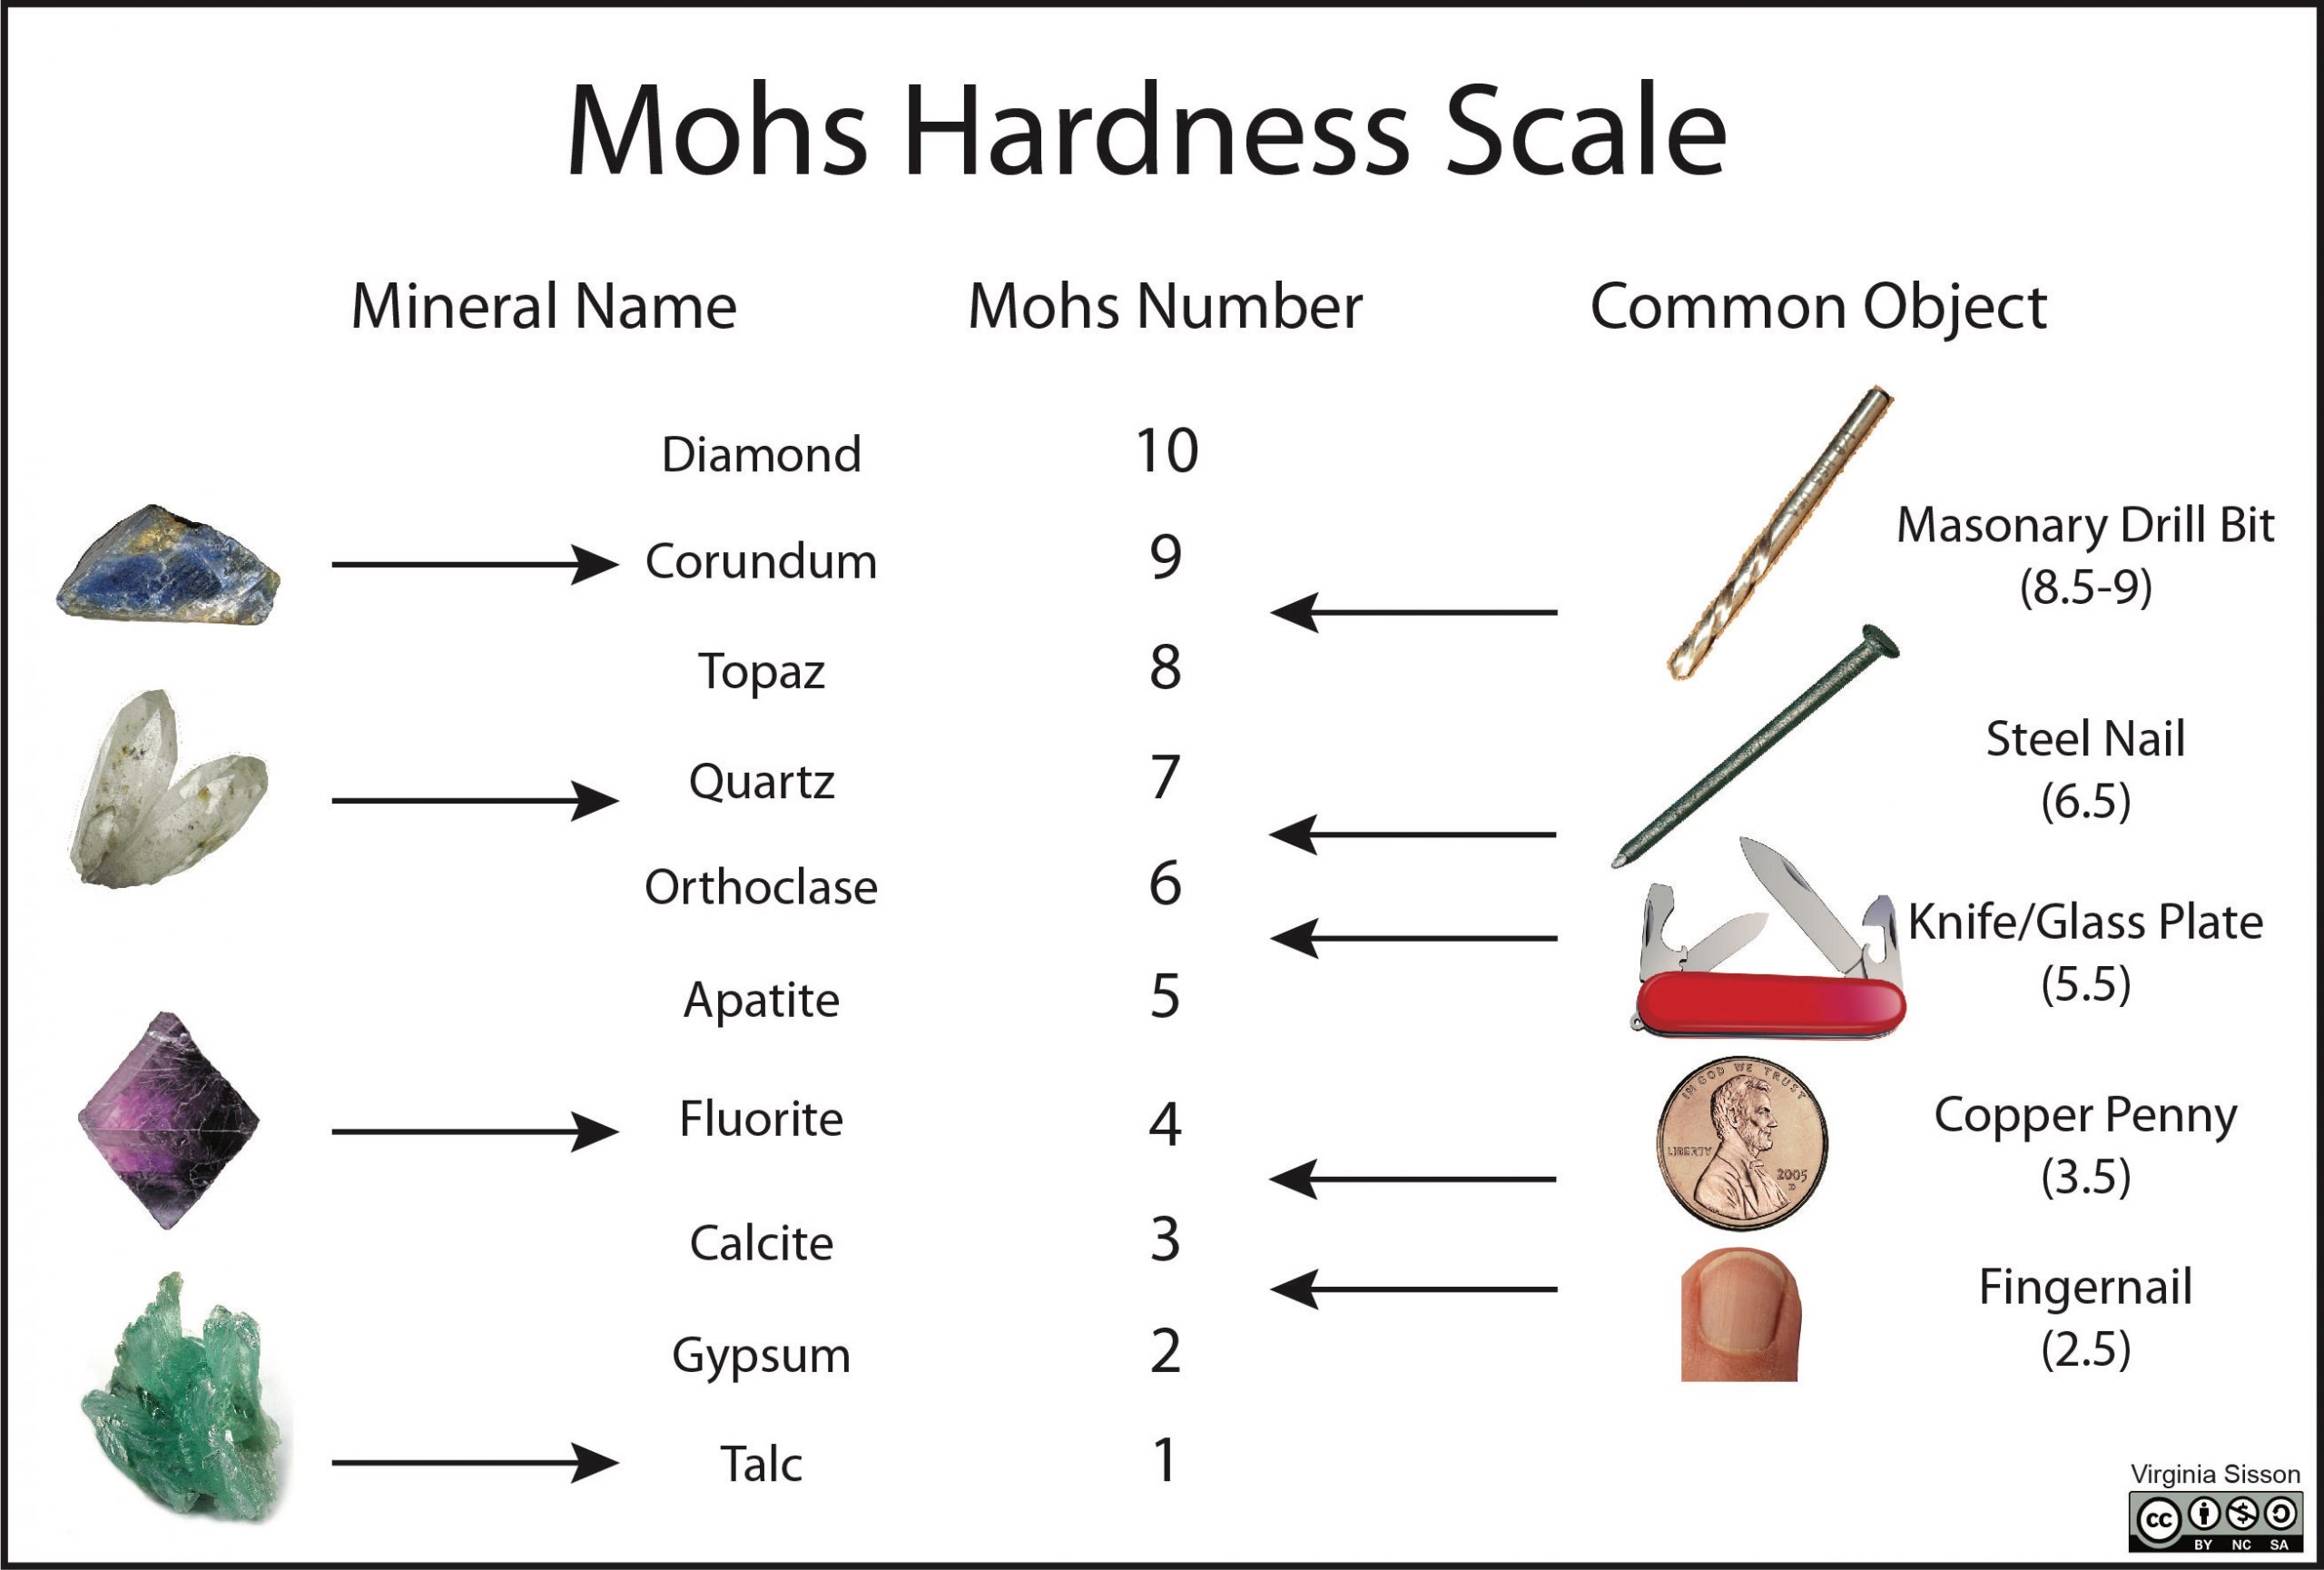 Various minerals and common objects used to define Mohs hardness scale